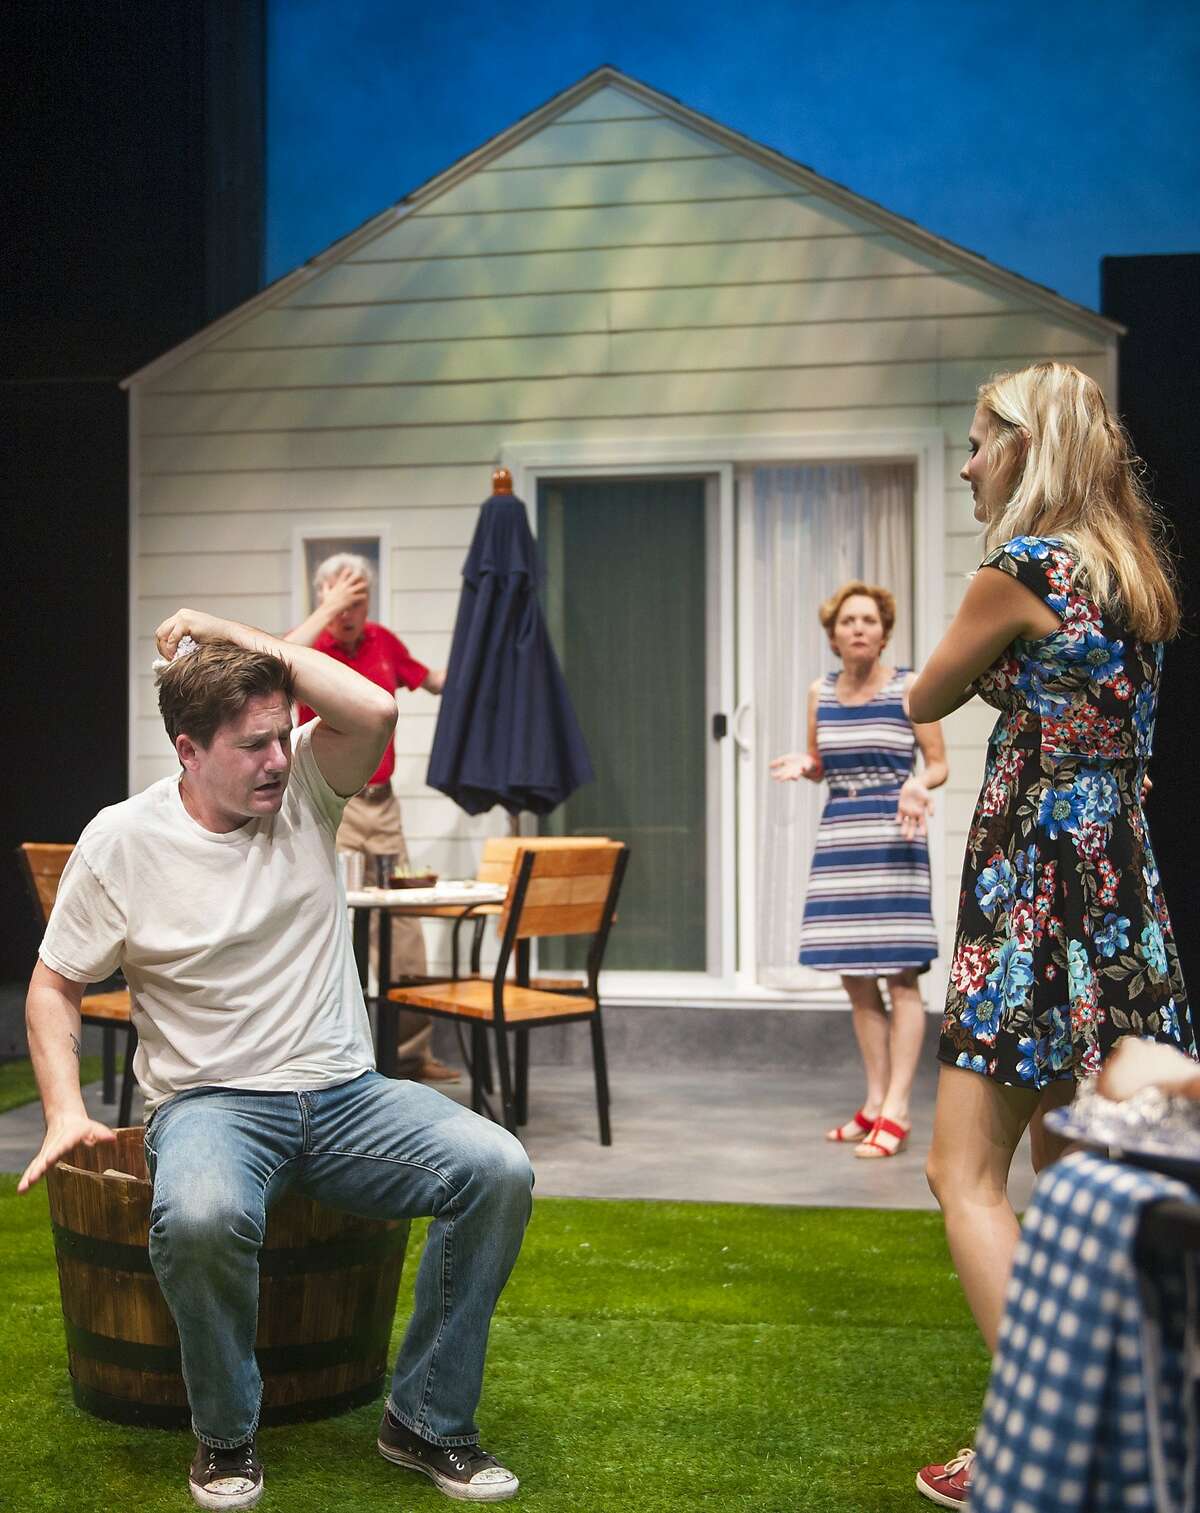 Ben (Jeff Garrett, left rear) and Mary's (Amy Resnick, right rear) backyard barbecue for new neighbor Kenny (Patrick Kelly Jones, left) and Sharon (Luisa Frasconi) gets a little out of control in "Detroit" at Aurora Theatre